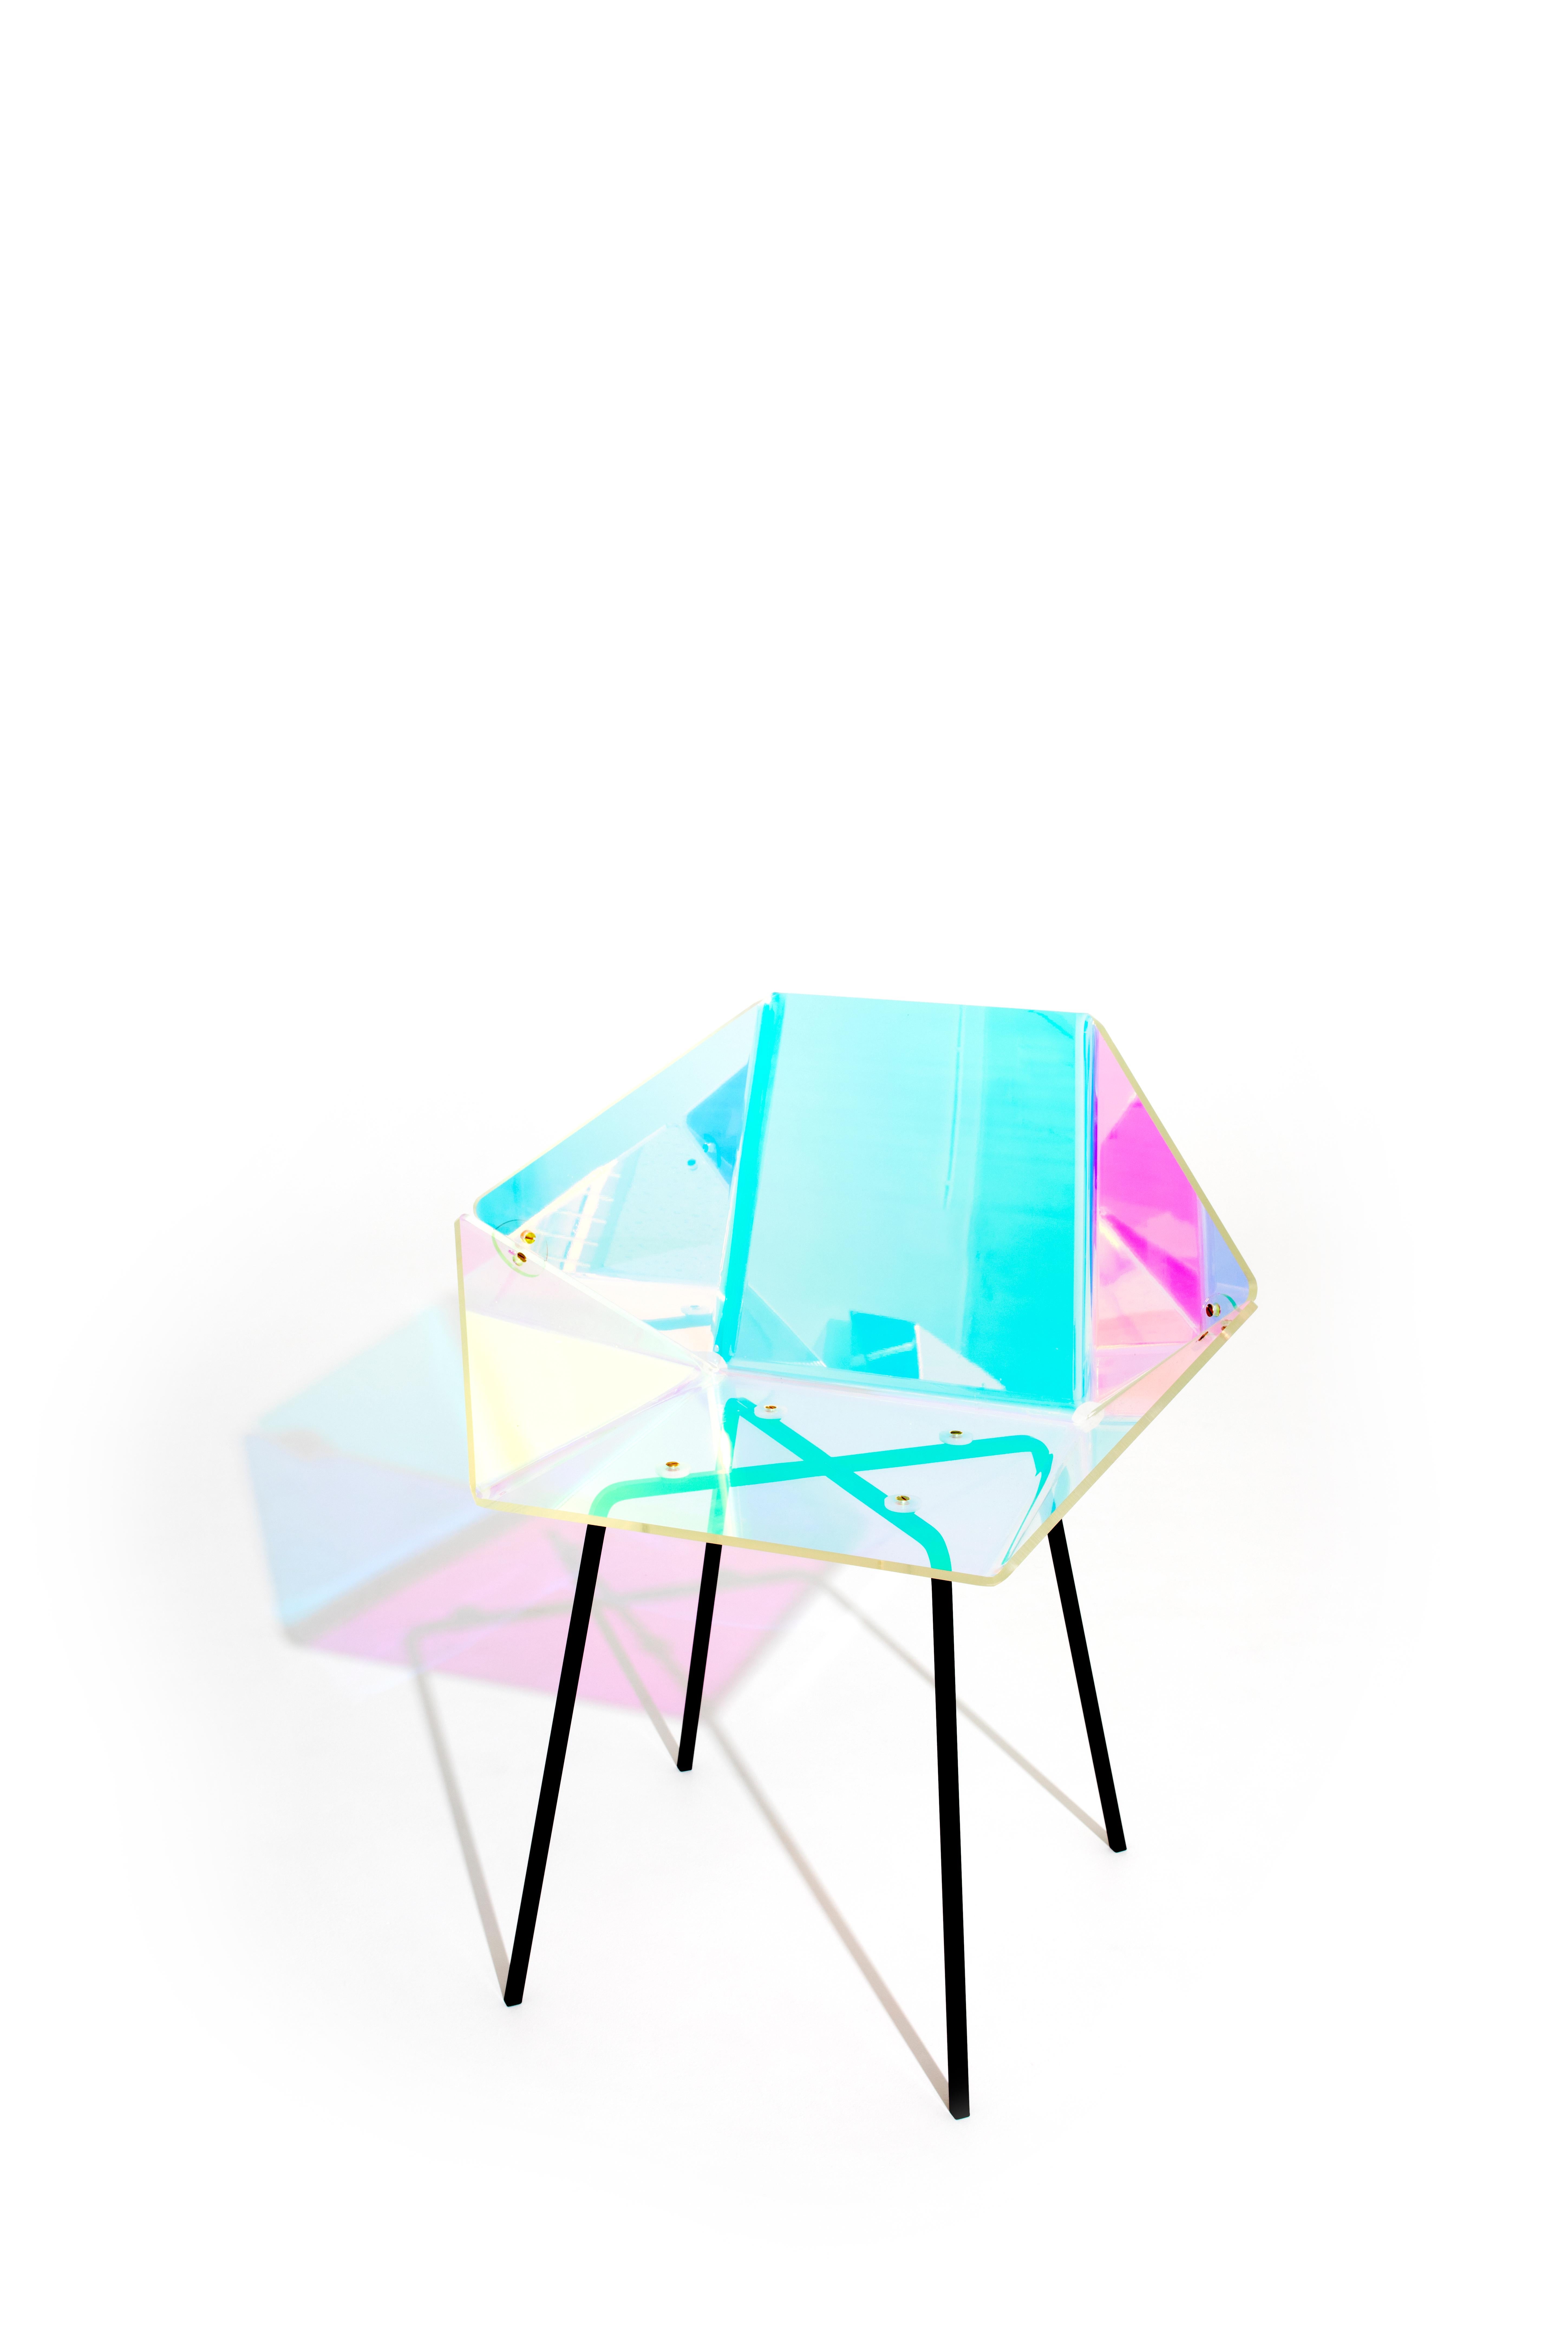 Prismania Chair Signed by Elise Luttik
Dimensions: D 48.5 x W 70 x H 79 cm
Materials: Polycarbonate transparent shell with a prismatic polyester film, steel, epoxy.
Also available with white base.

The transparent Prismania Chair is both an artefact